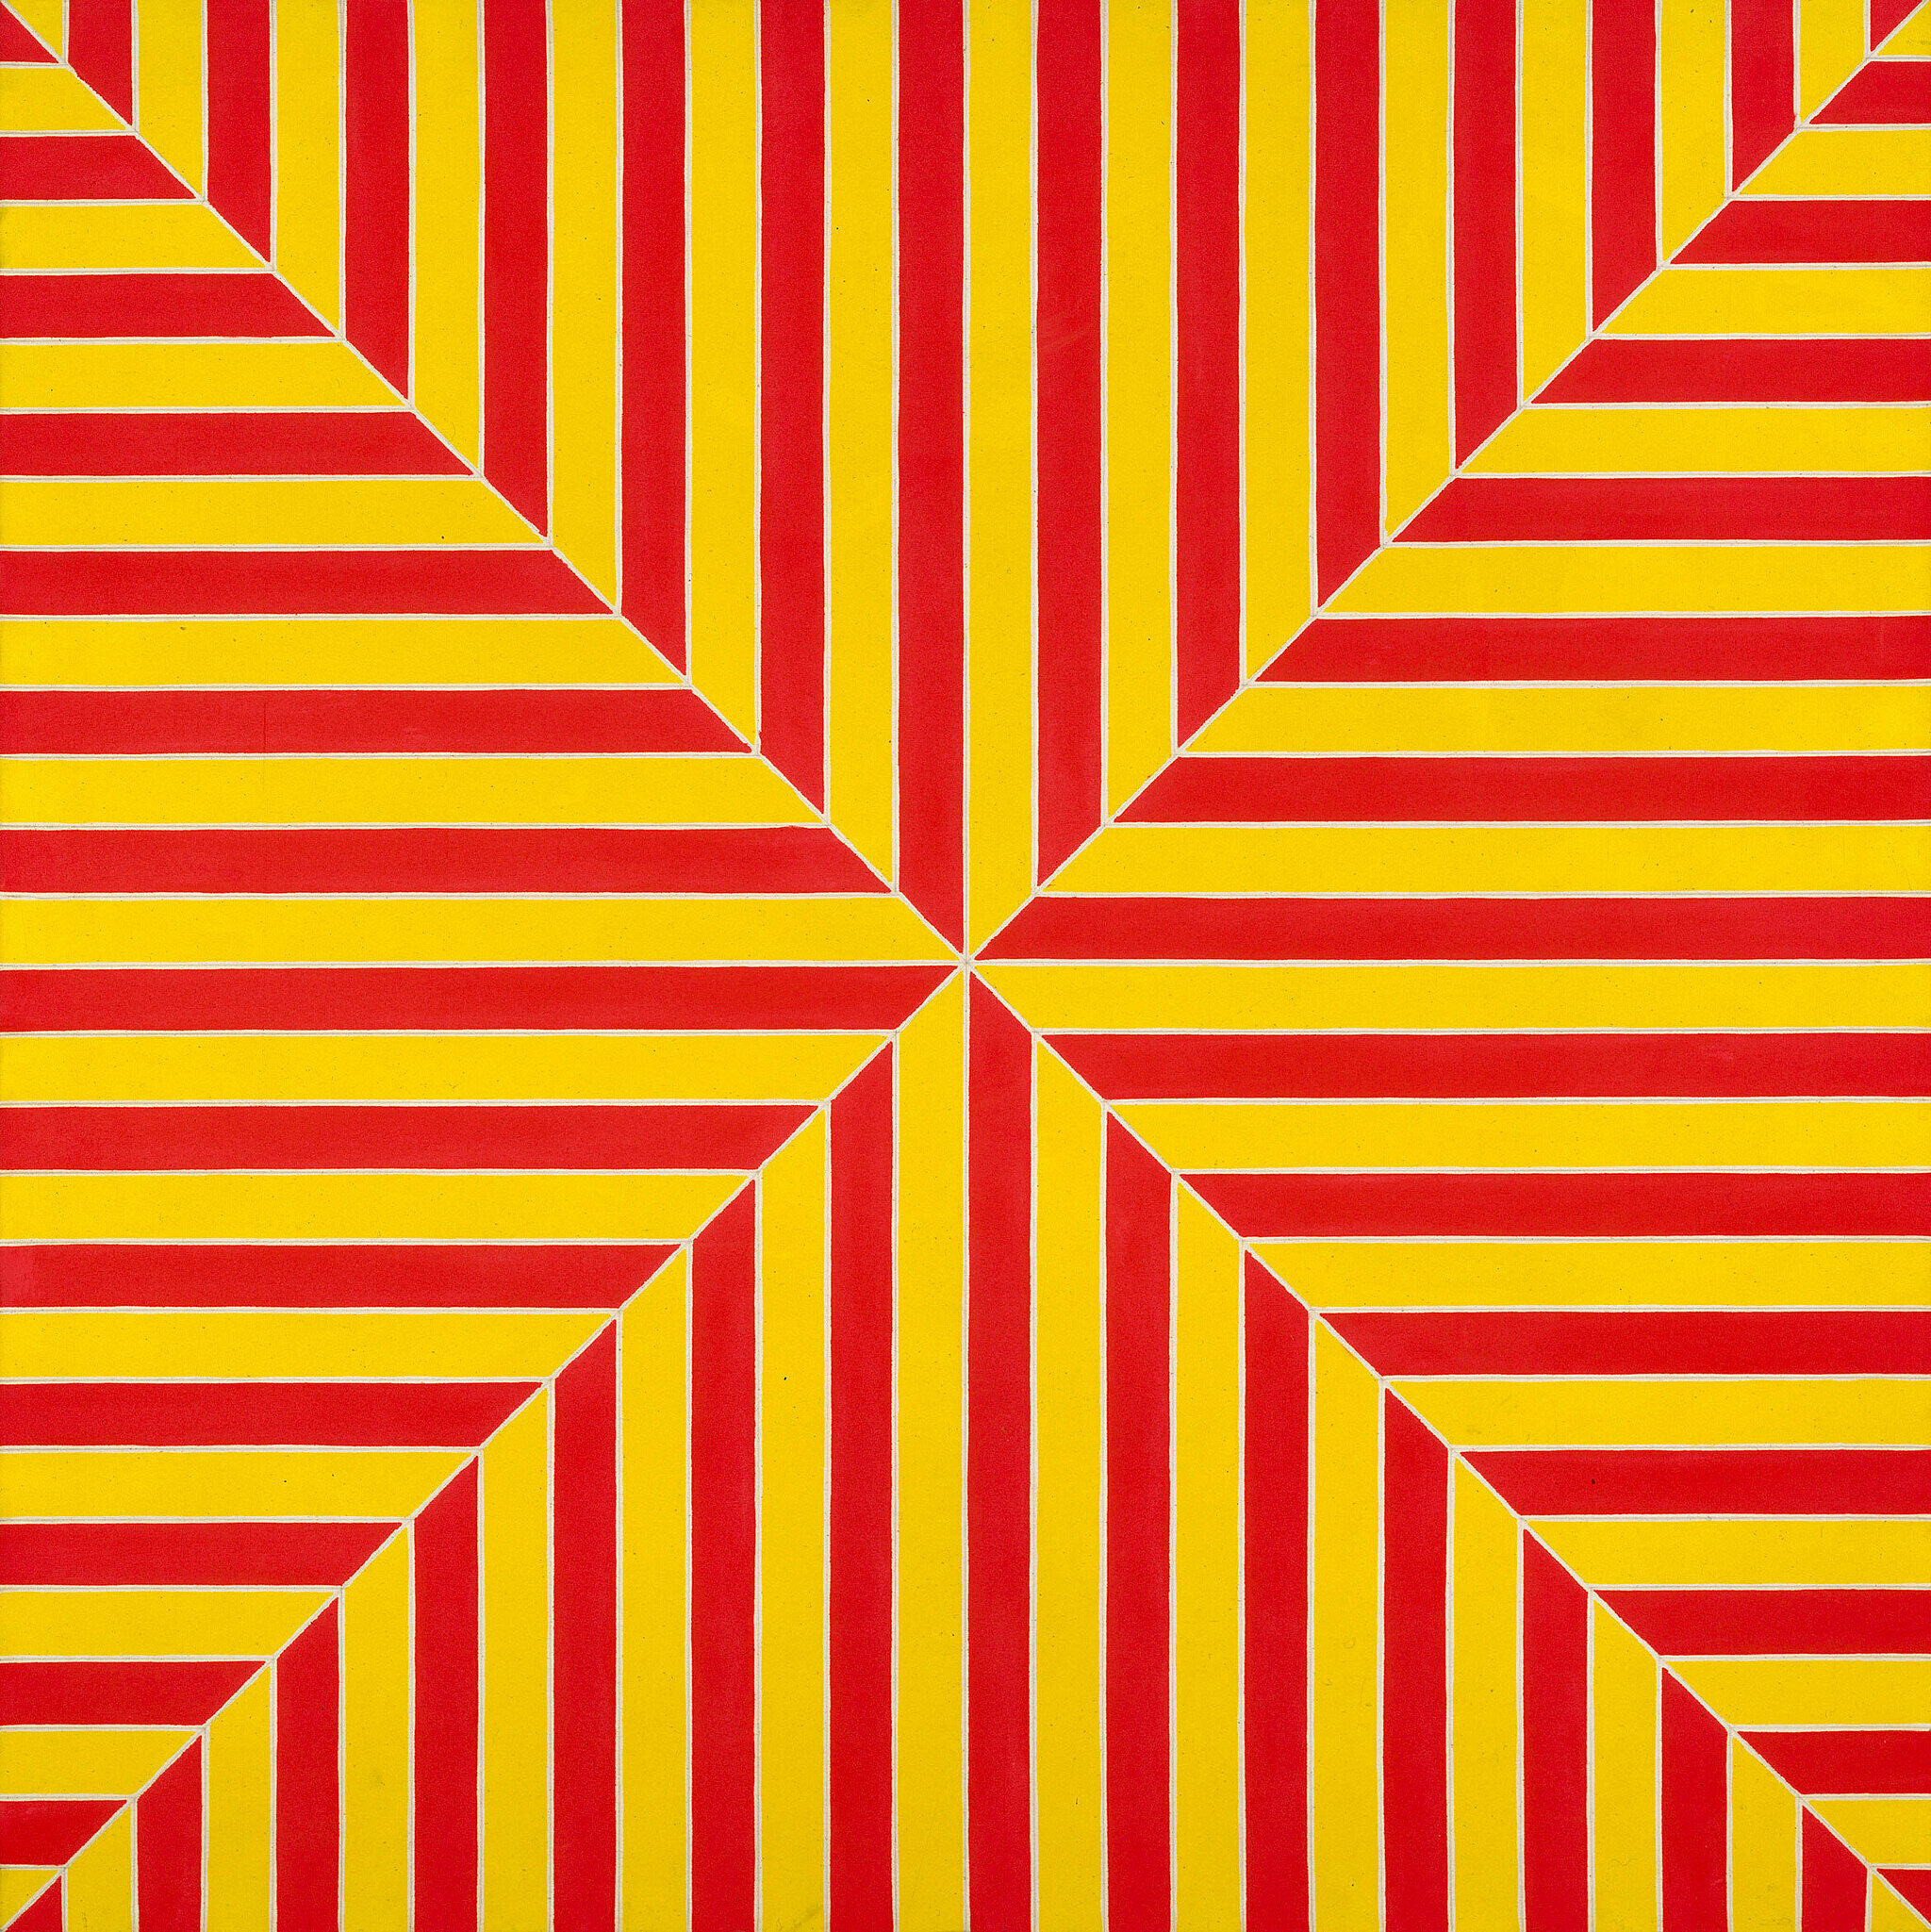 Geometric pattern with red and yellow diagonal stripes forming an X shape on a square canvas.